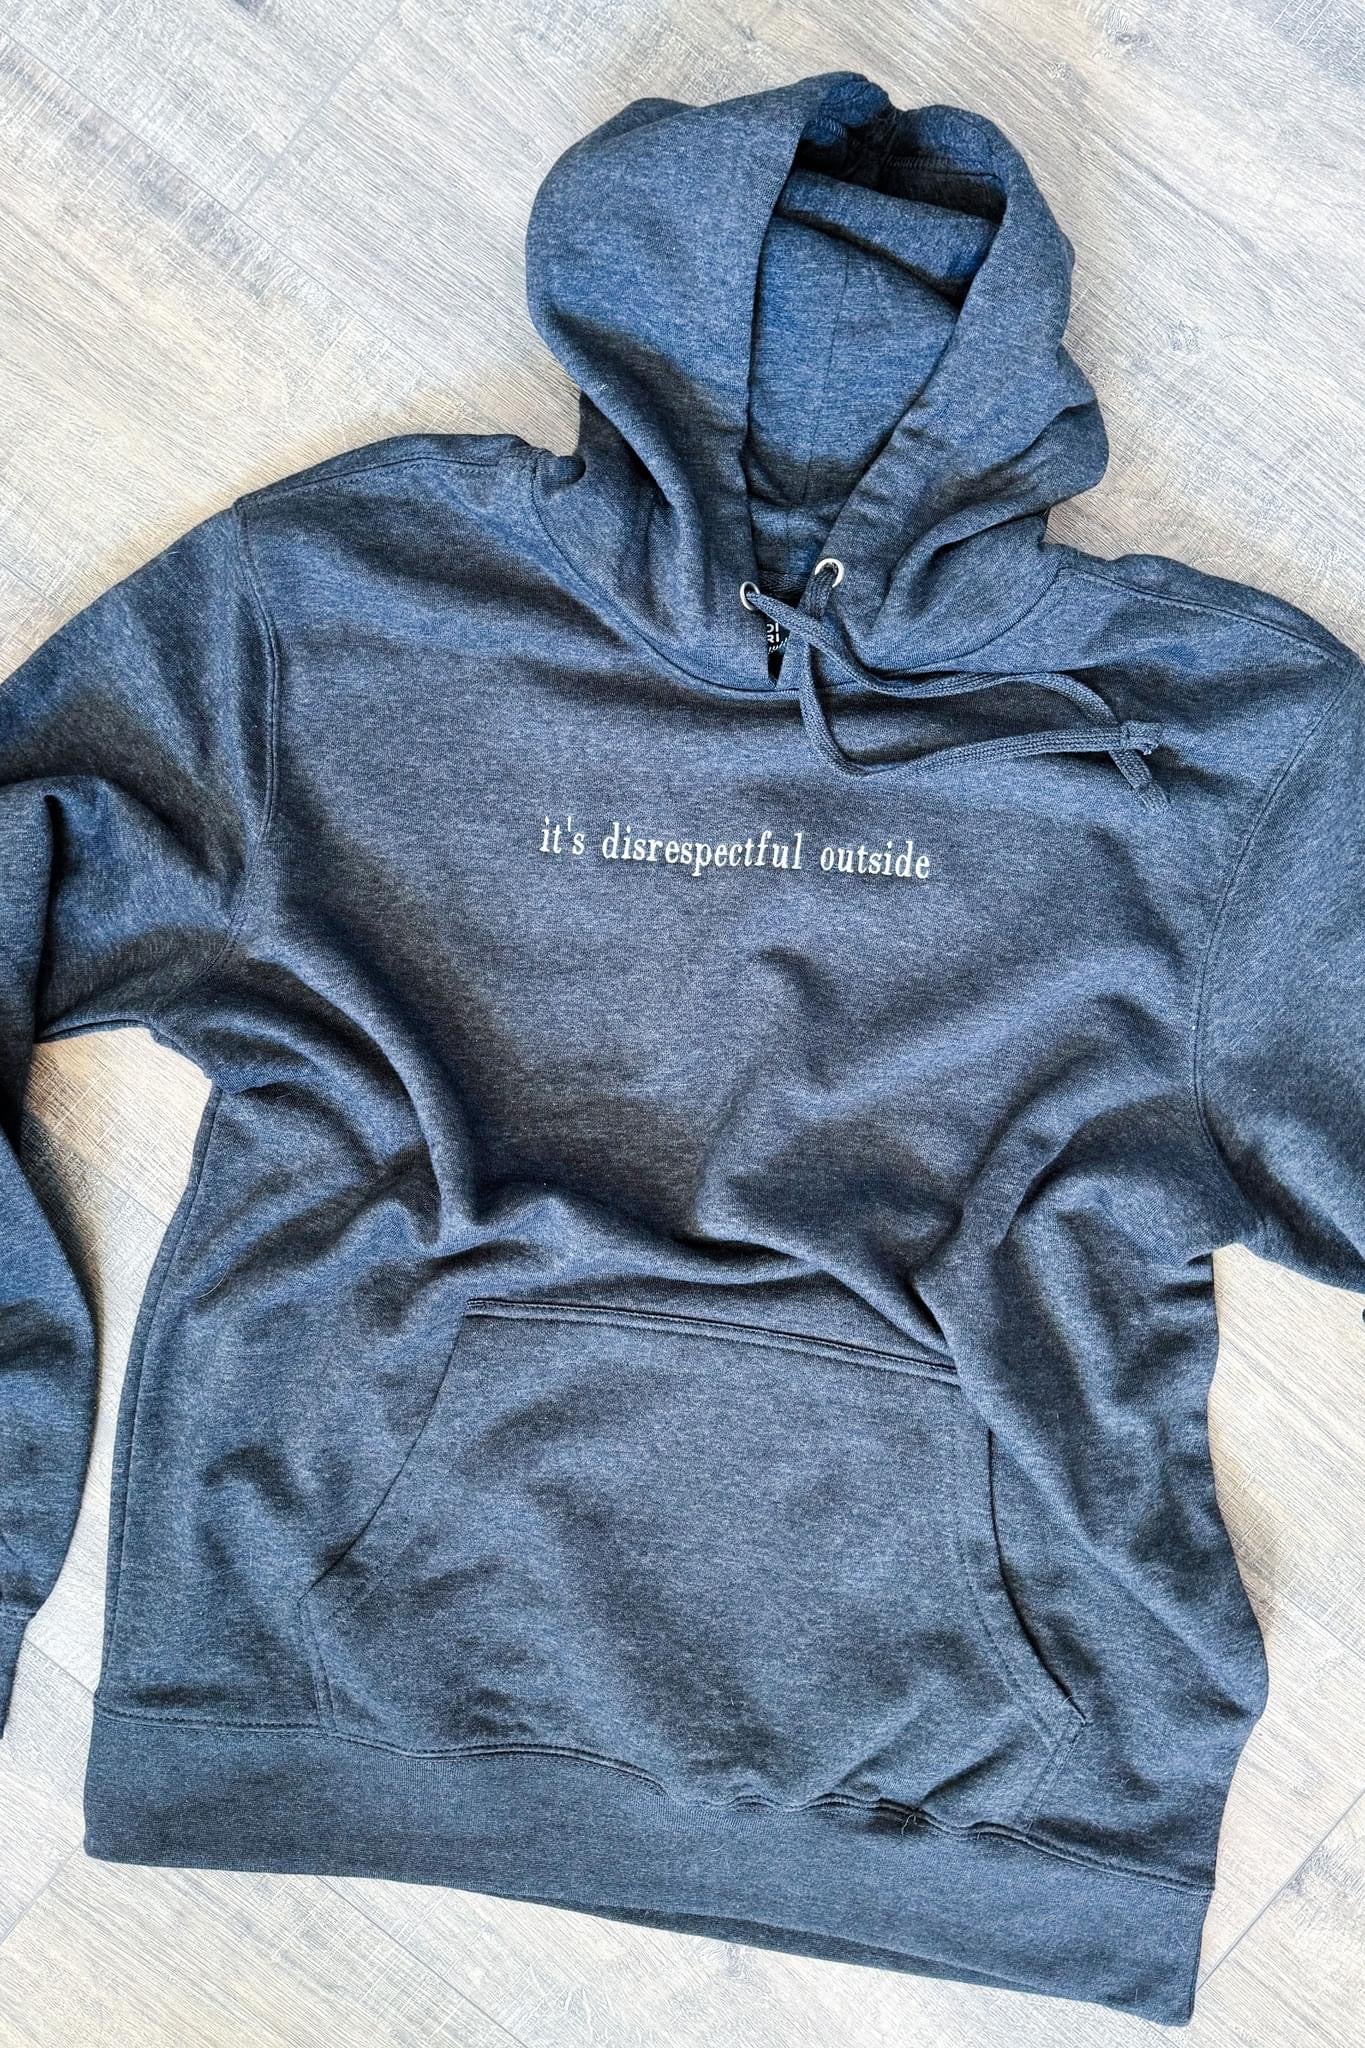 PREORDER ITS DISRESPECTFUL OUTSIDE HOODIE